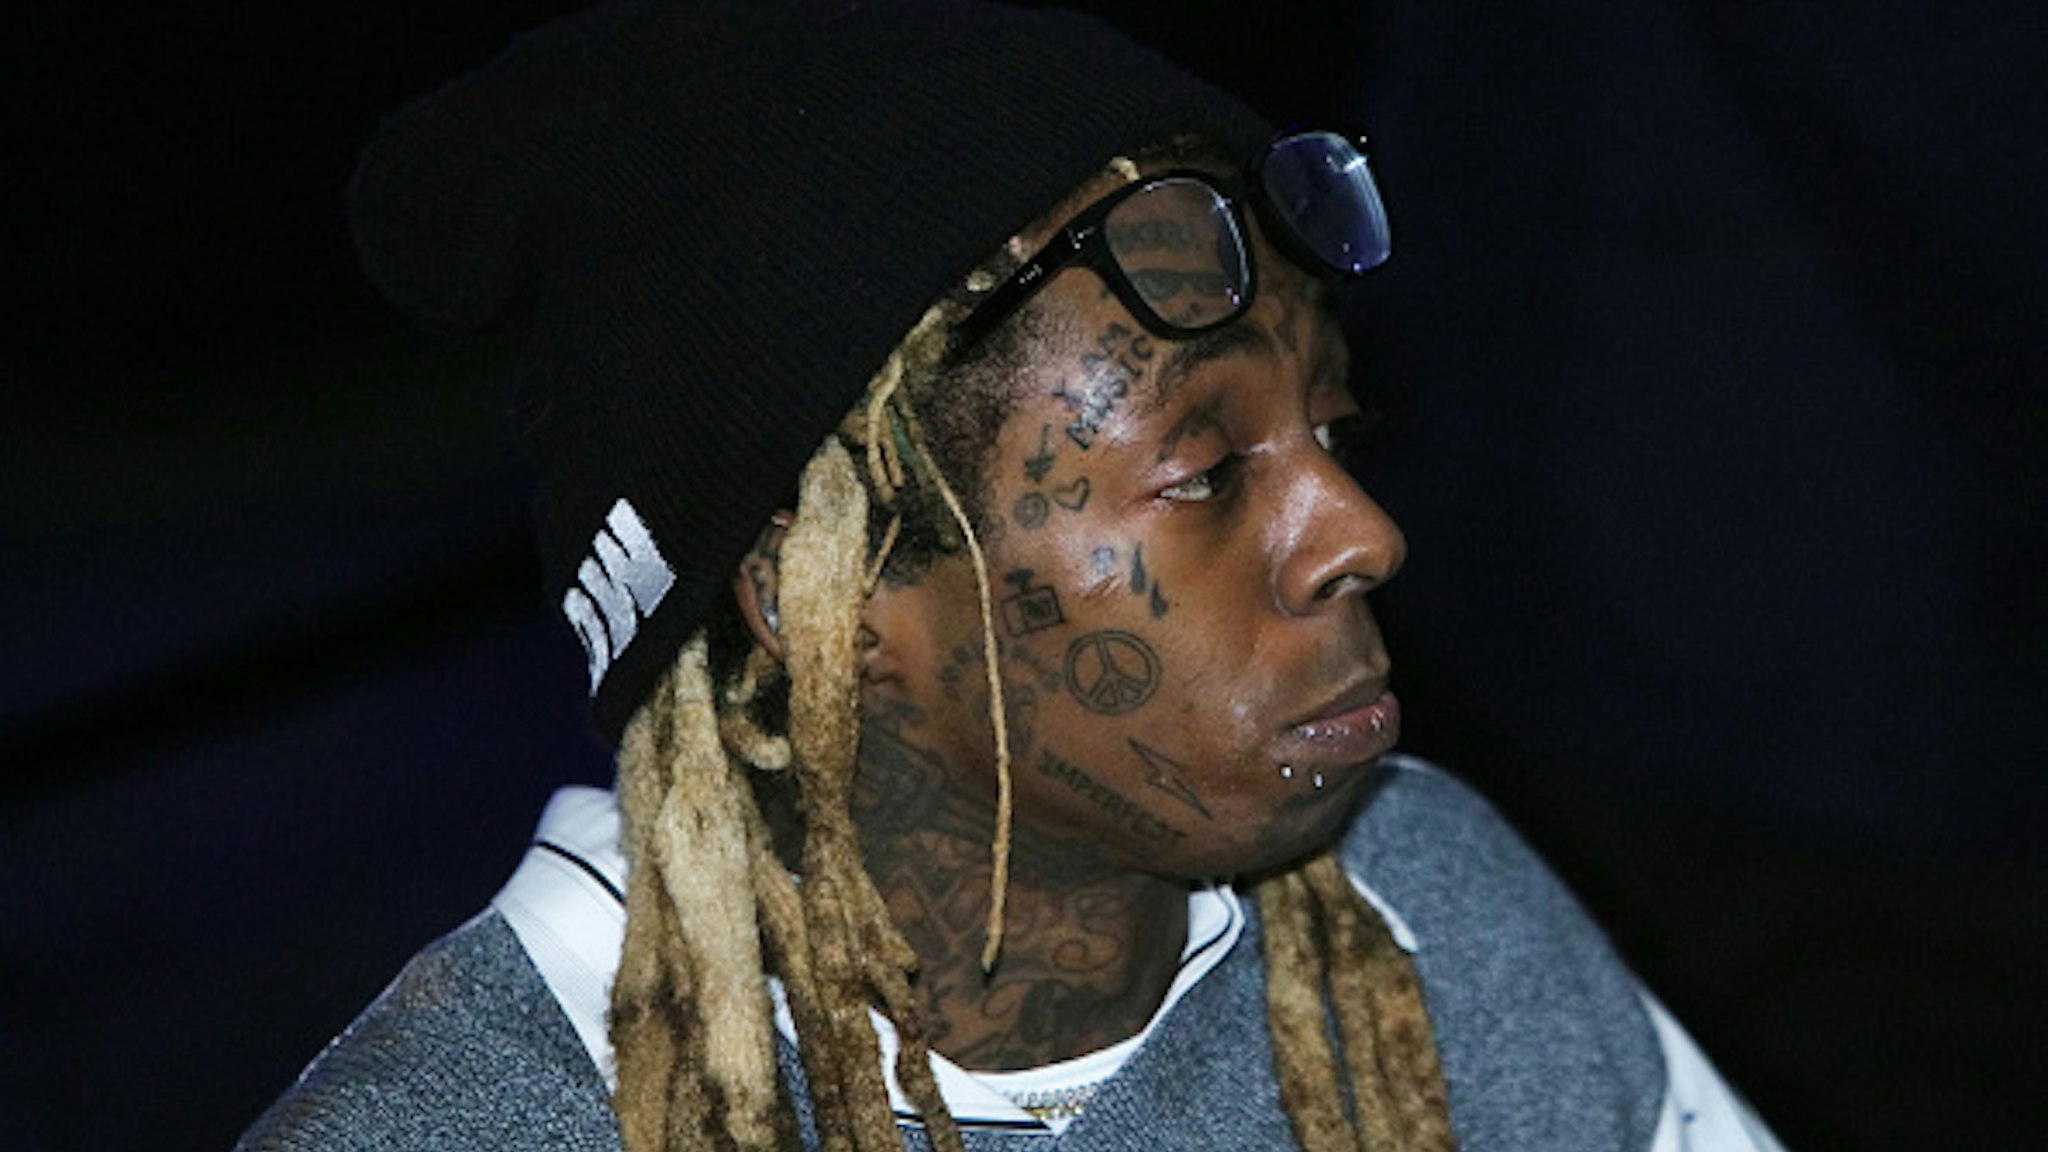 MIAMI, FLORIDA - FEBRUARY 01: Lil Wayne attends Lil Wayne's "Funeral" album release party on February 01, 2020 in Miami, Florida.